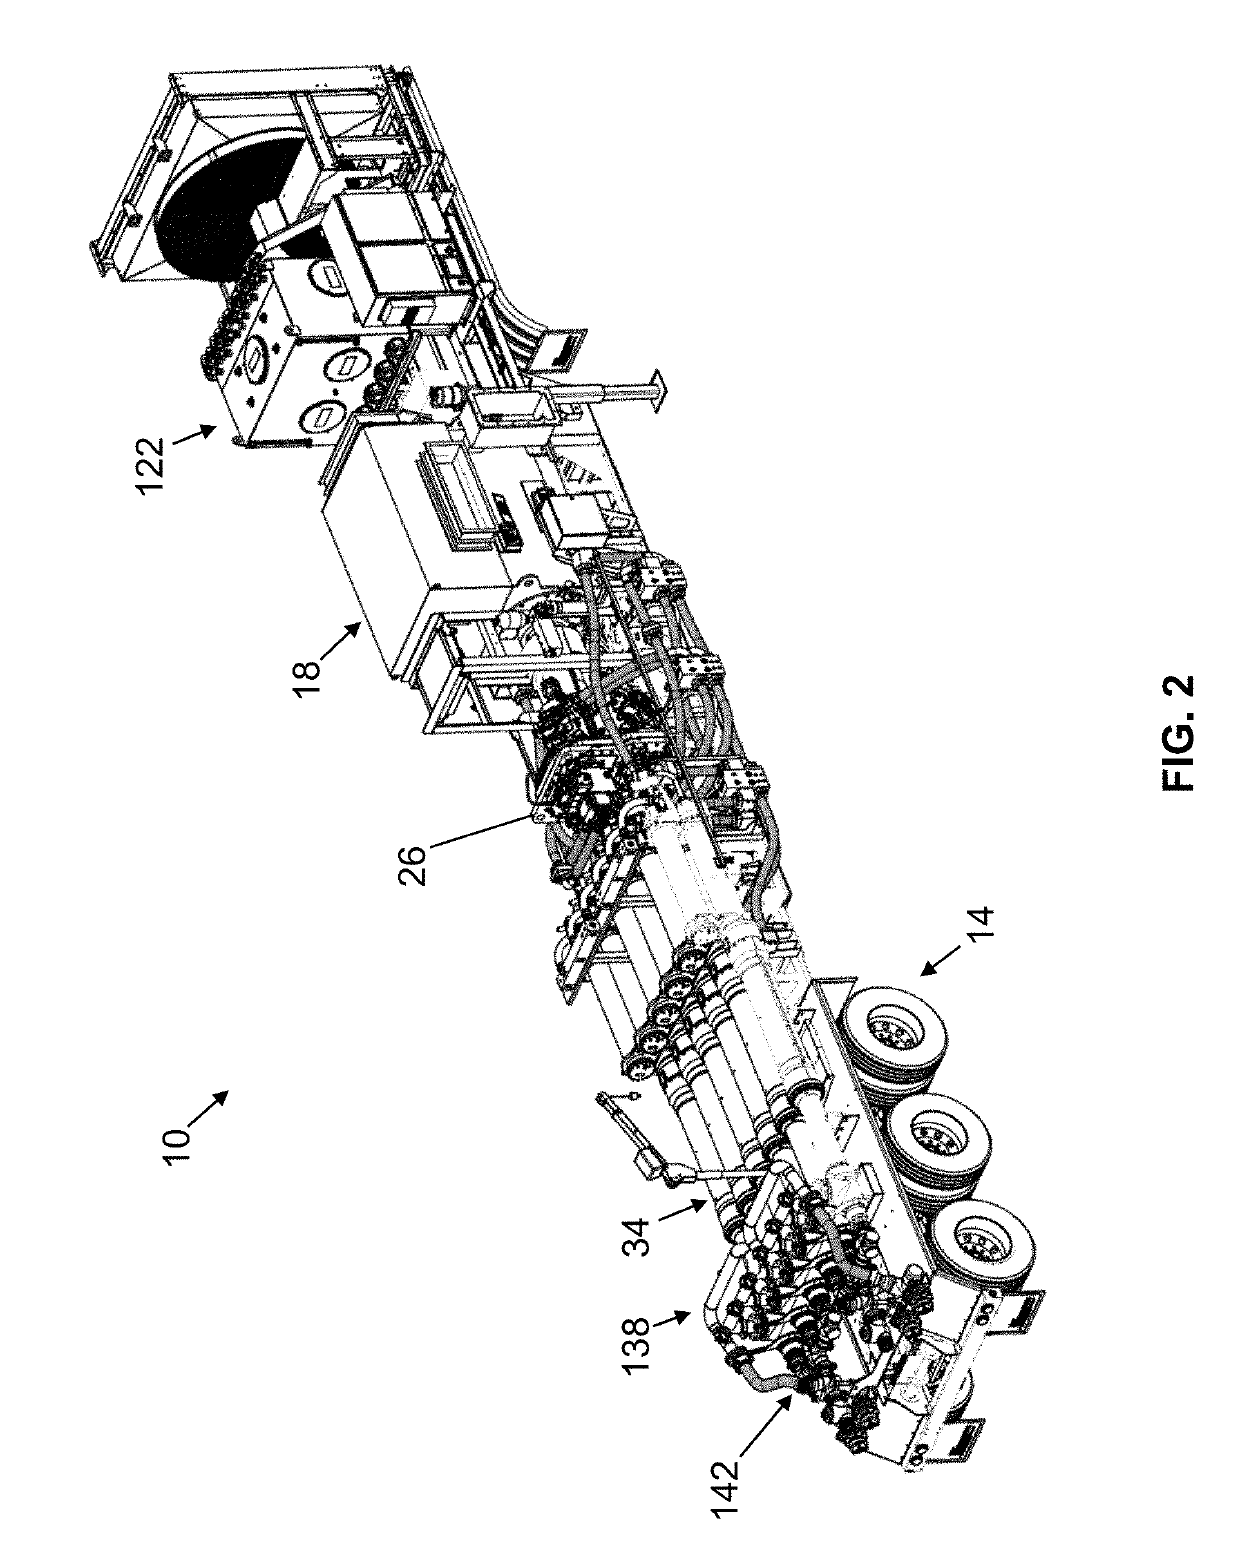 Well service pump systems and related methods